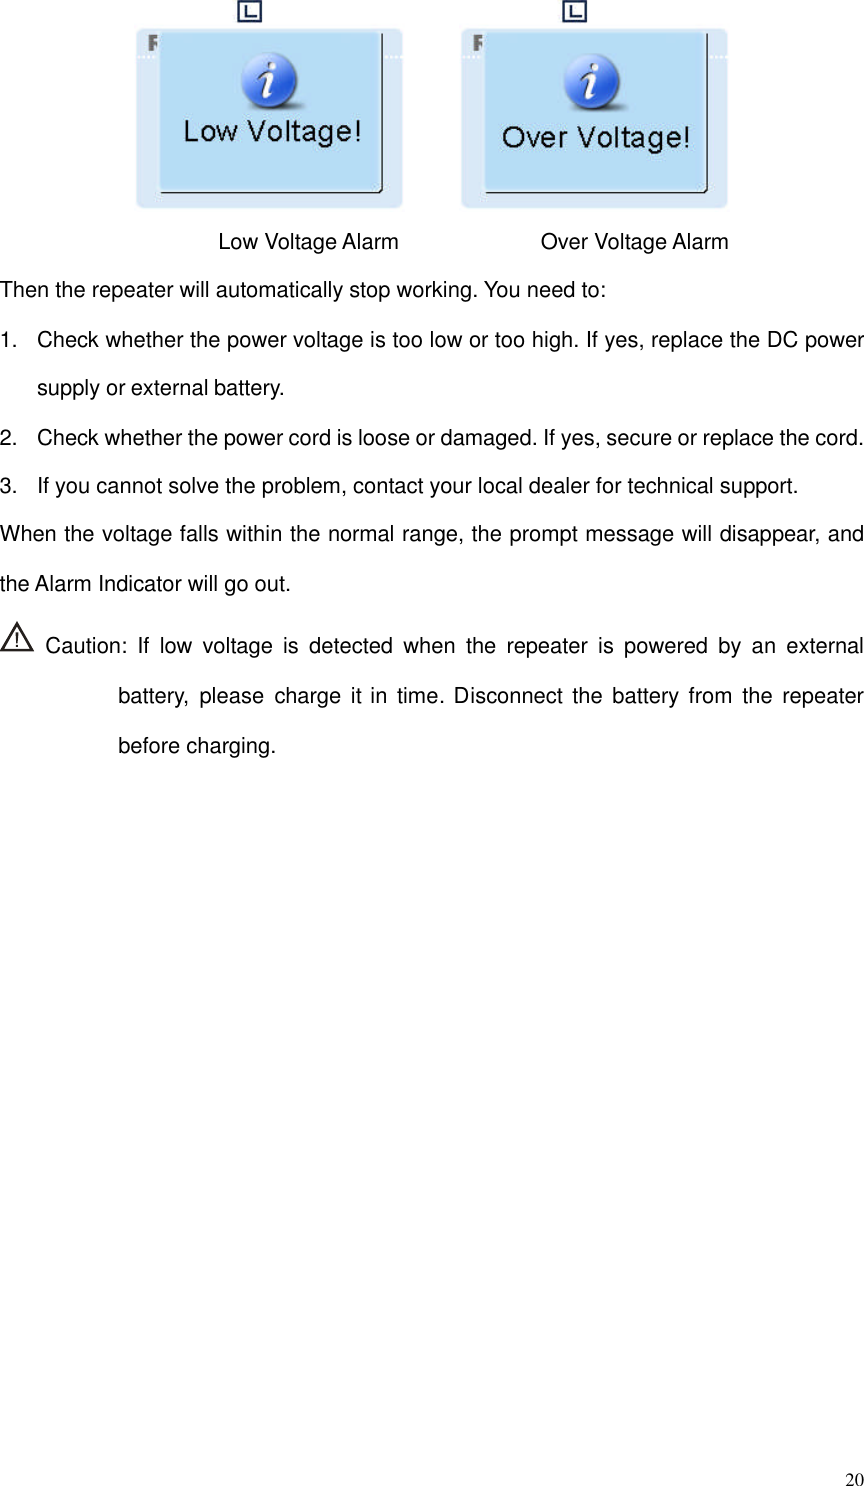 20Low Voltage Alarm Over Voltage AlarmThen the repeater will automatically stop working. You need to:1. Check whether the power voltage is too low or too high. If yes, replace the DC powersupply or external battery.2. Check whether the power cord is loose or damaged. If yes, secure or replace the cord.3. If you cannot solve the problem, contact your local dealer for technical support.When the voltage falls within the normal range, the prompt message will disappear, andthe Alarm Indicator will go out.Caution: If low voltage is detected when the repeater is powered by an externalbattery, please charge it in time. Disconnect the battery from the repeaterbefore charging.